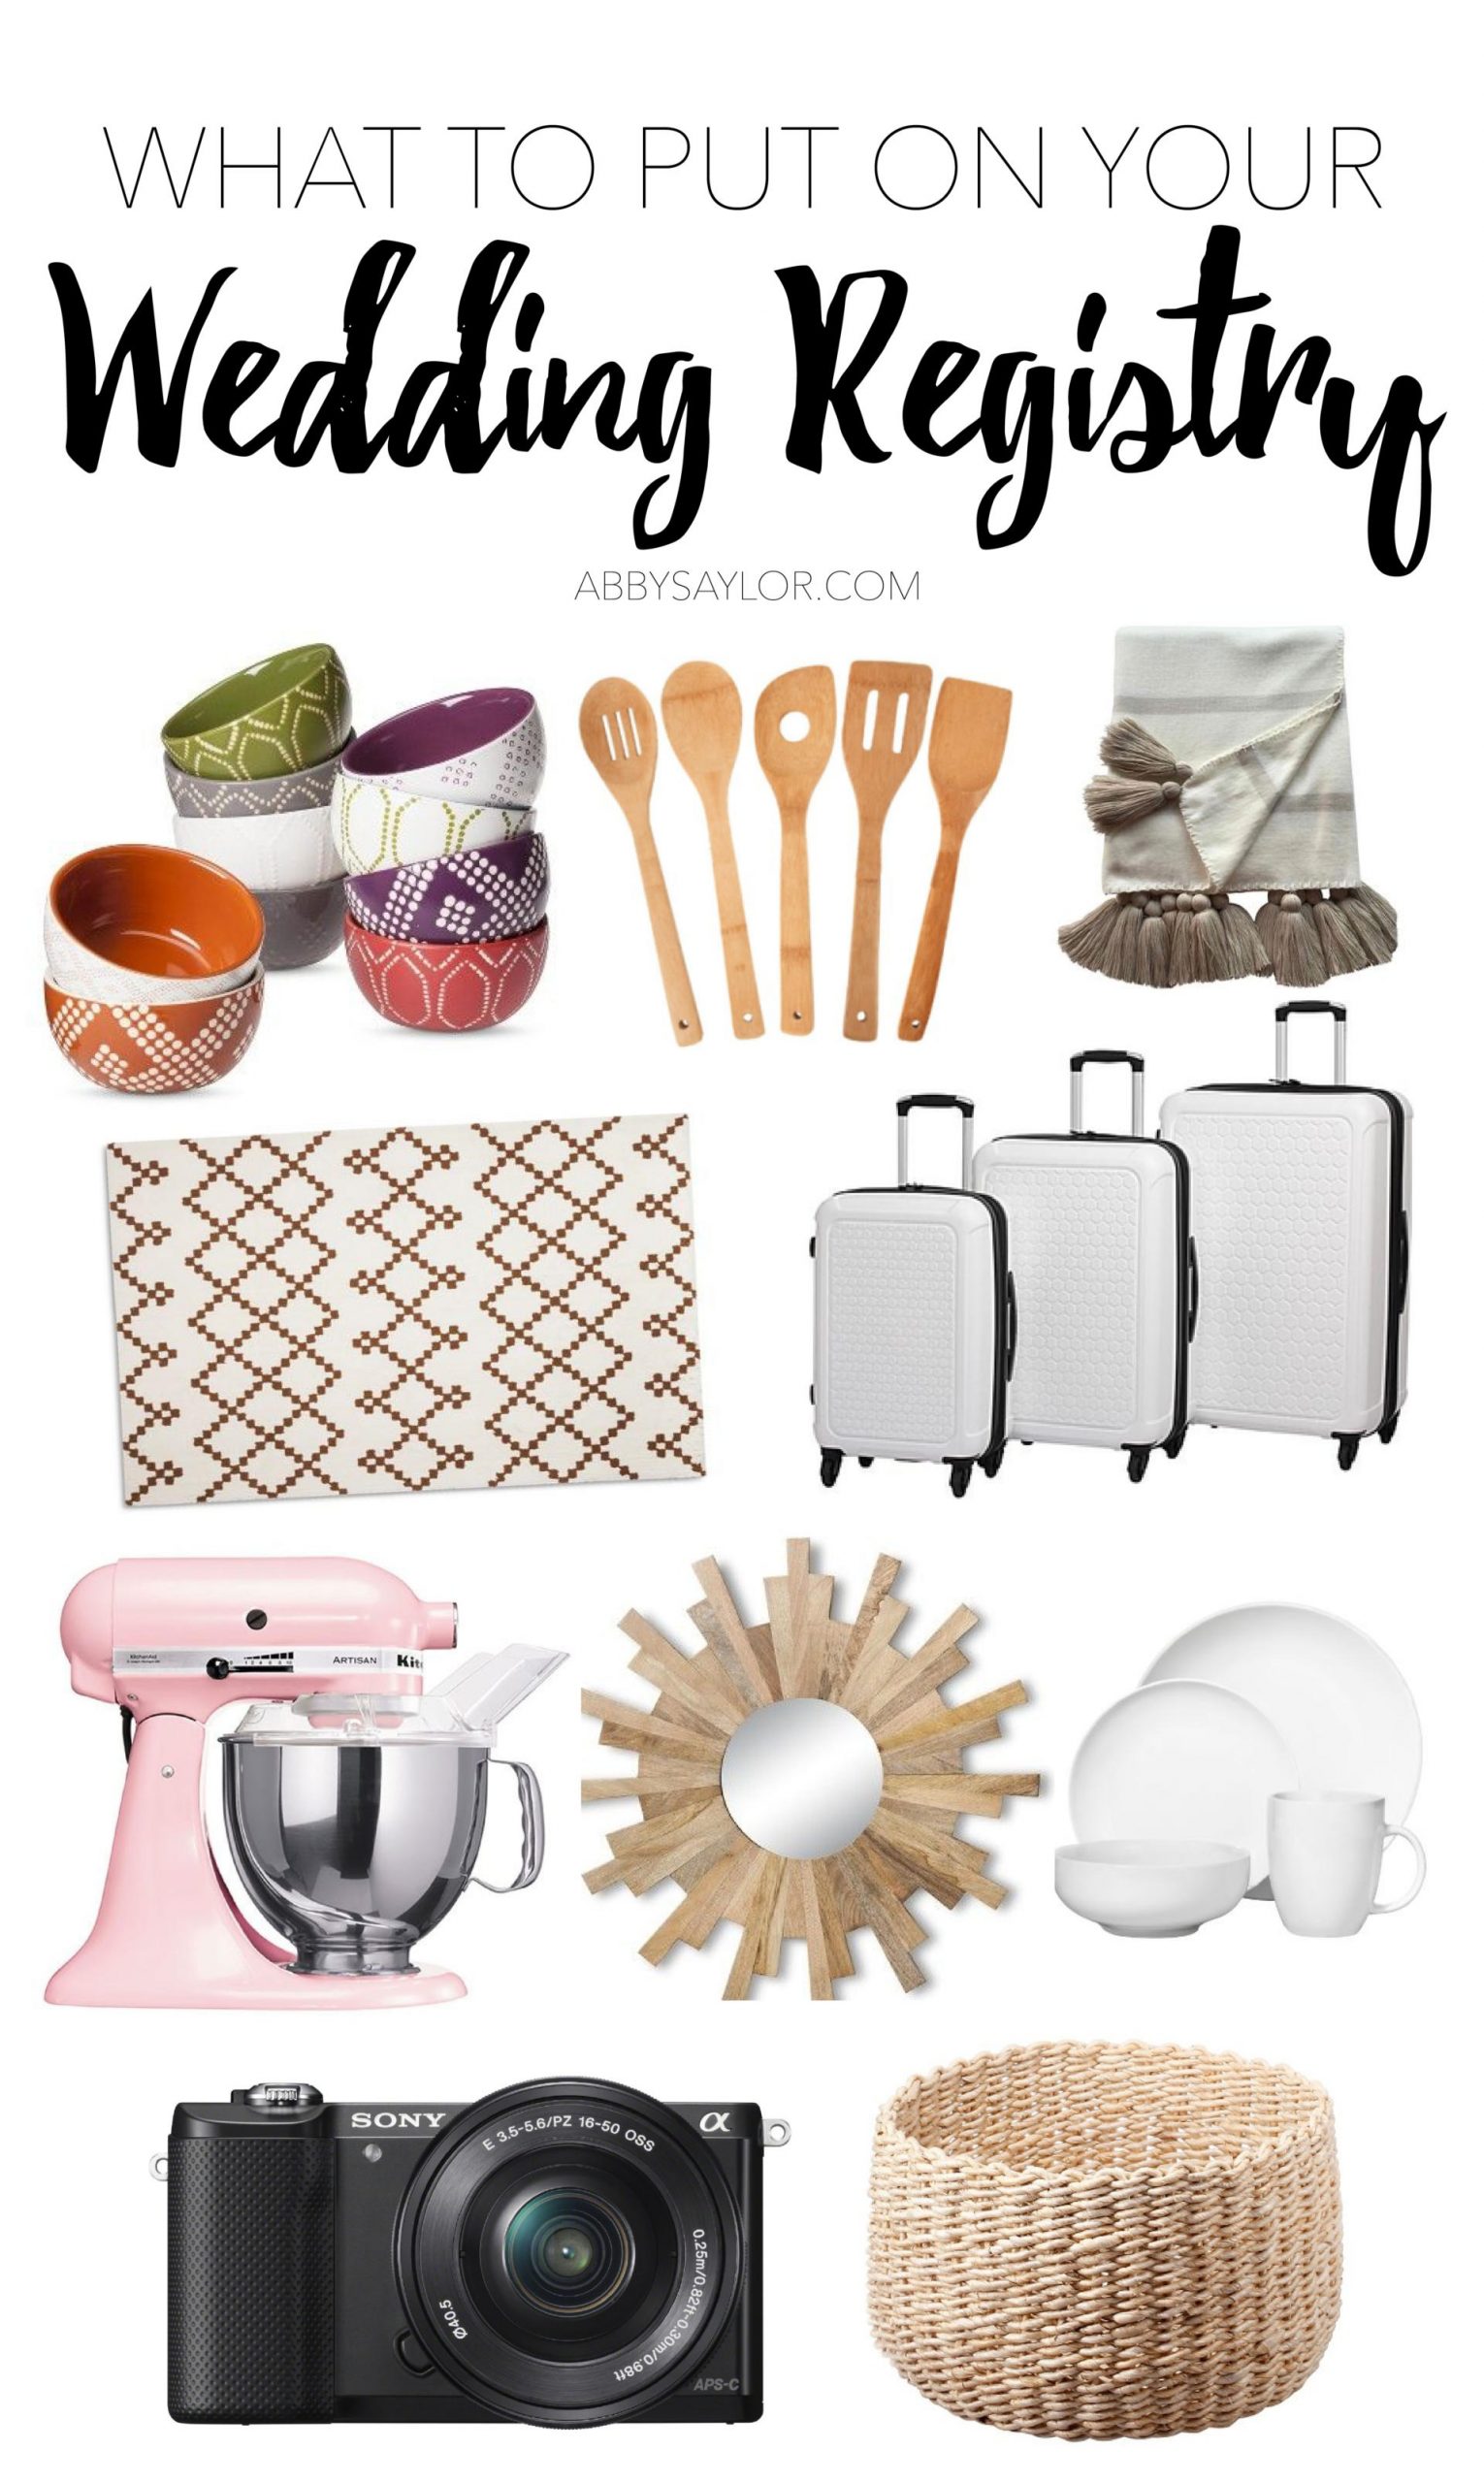 What To Put On Your Wedding Registry? (The Best Ideas For All Couples)